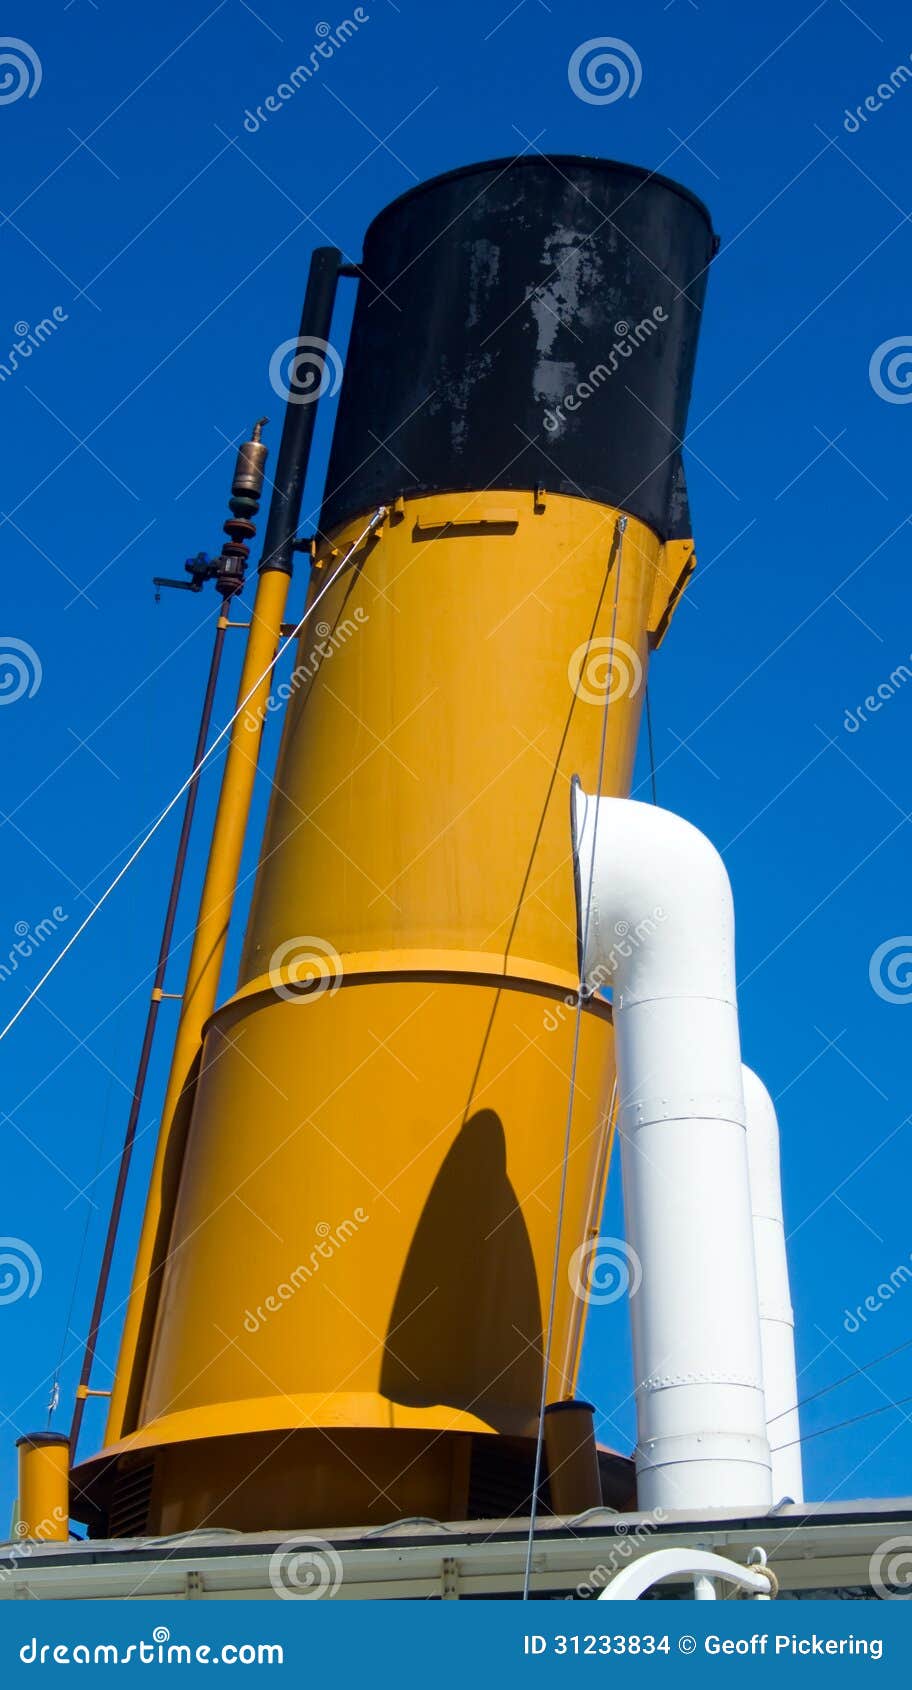 Funnel stock photo. Image of vessel, ferry, craft, power ...